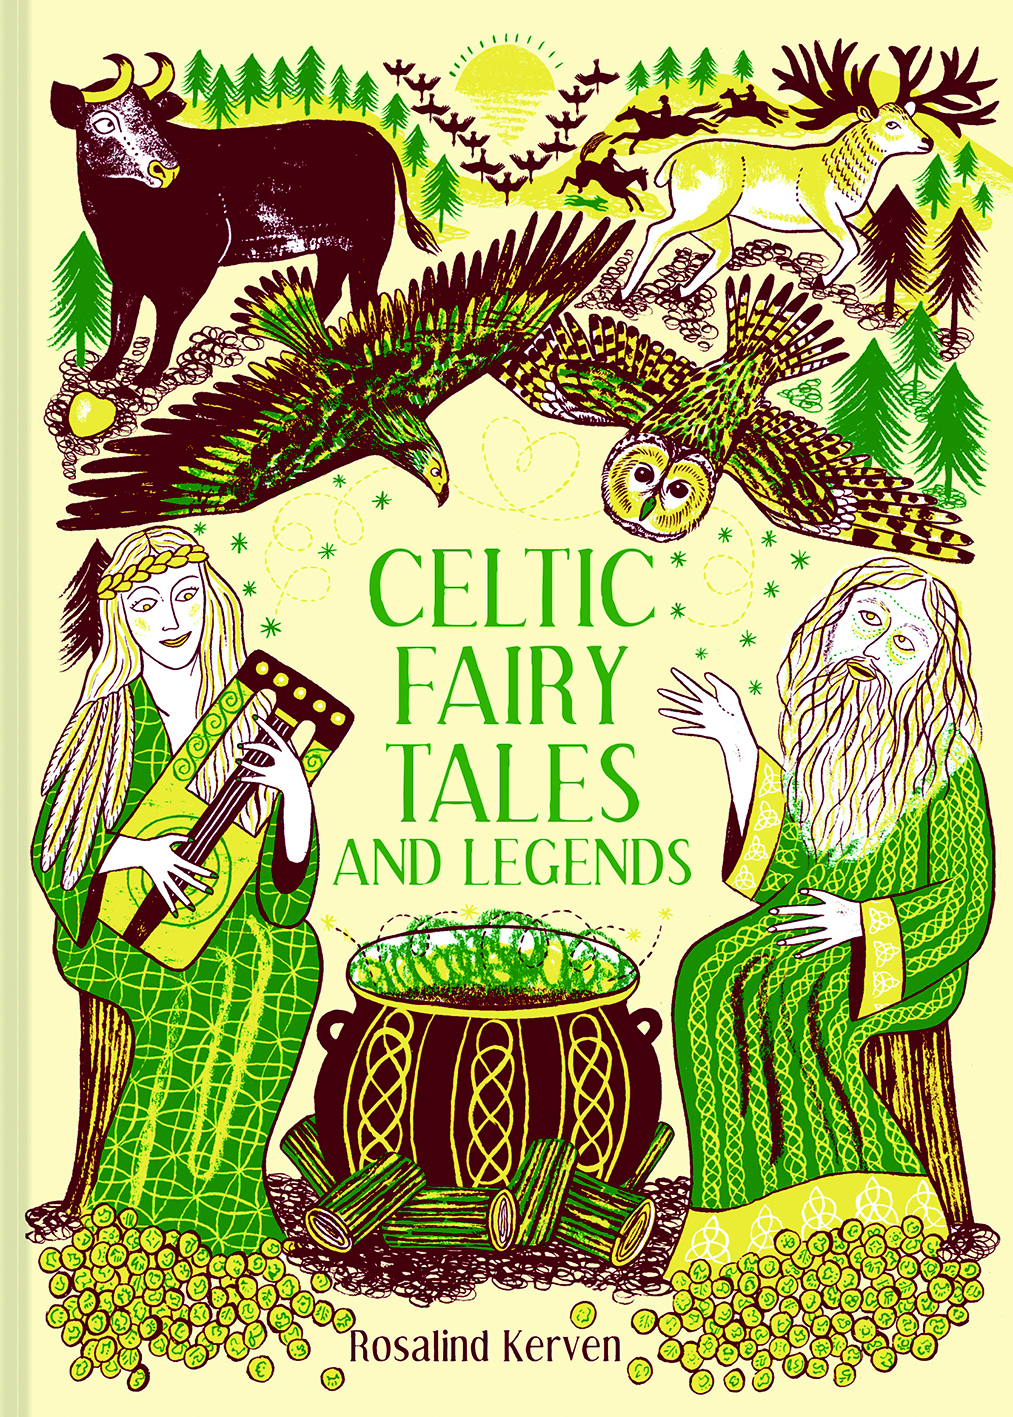 Celtic_Fairy_Tales_and_Legends_book_front_cover.